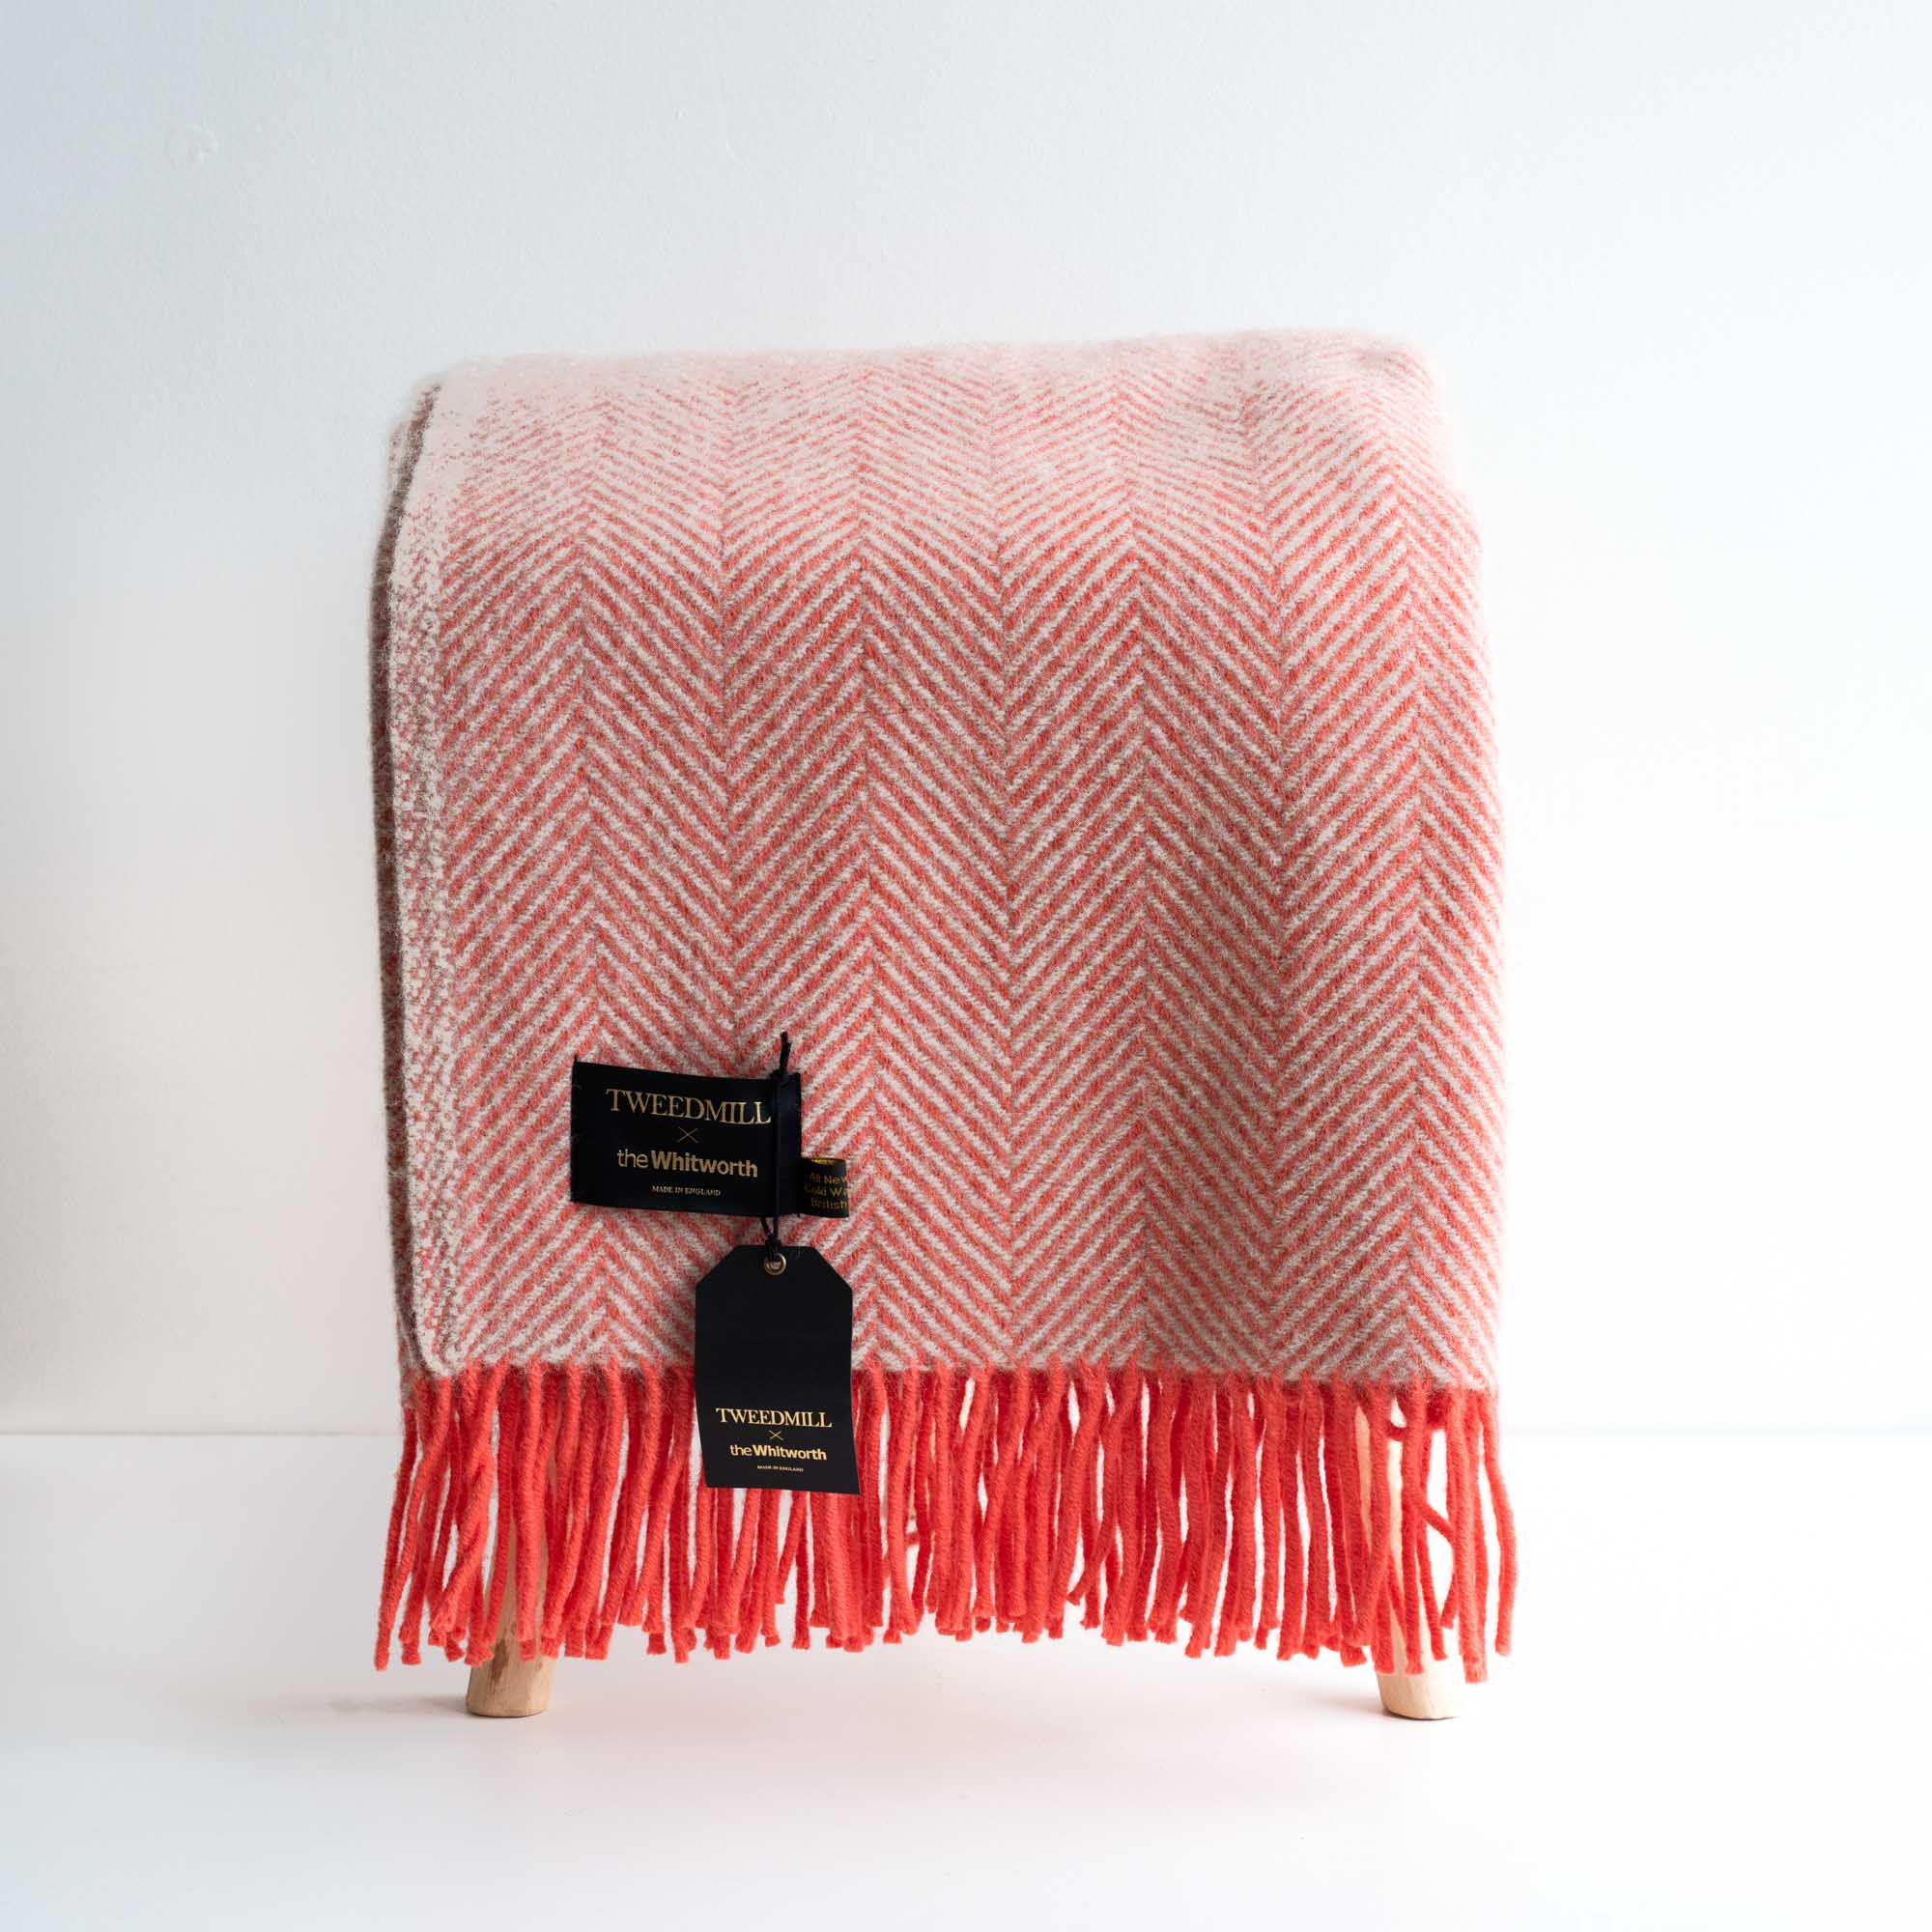 Image of a red woollen blanket on a stool - white background